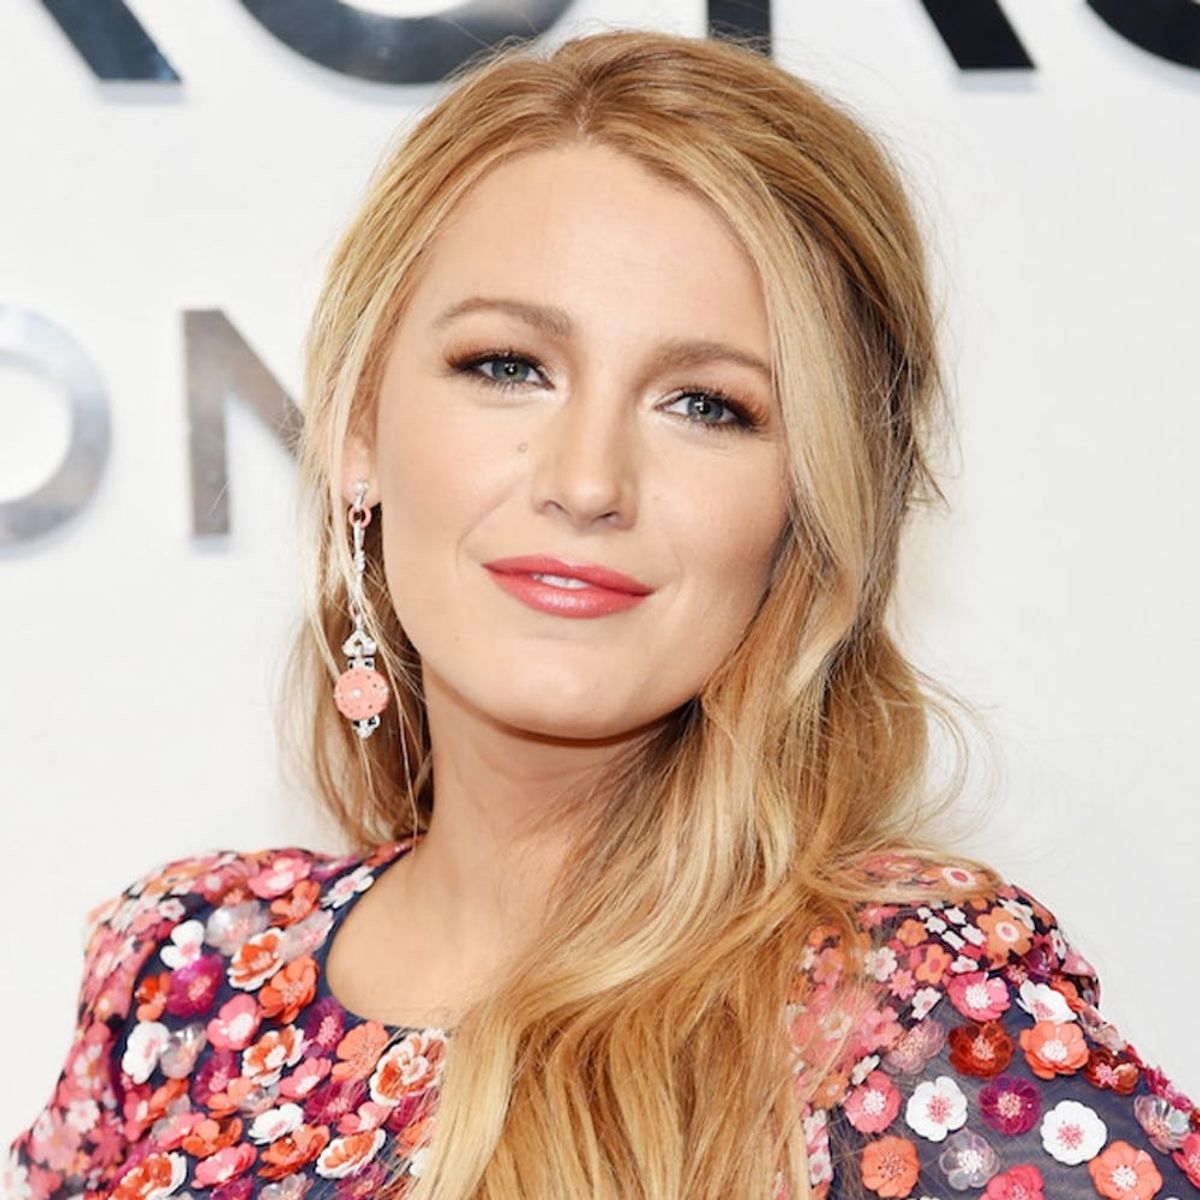 40 Times Blake Lively’s Instagram Proved She Was Your BFF